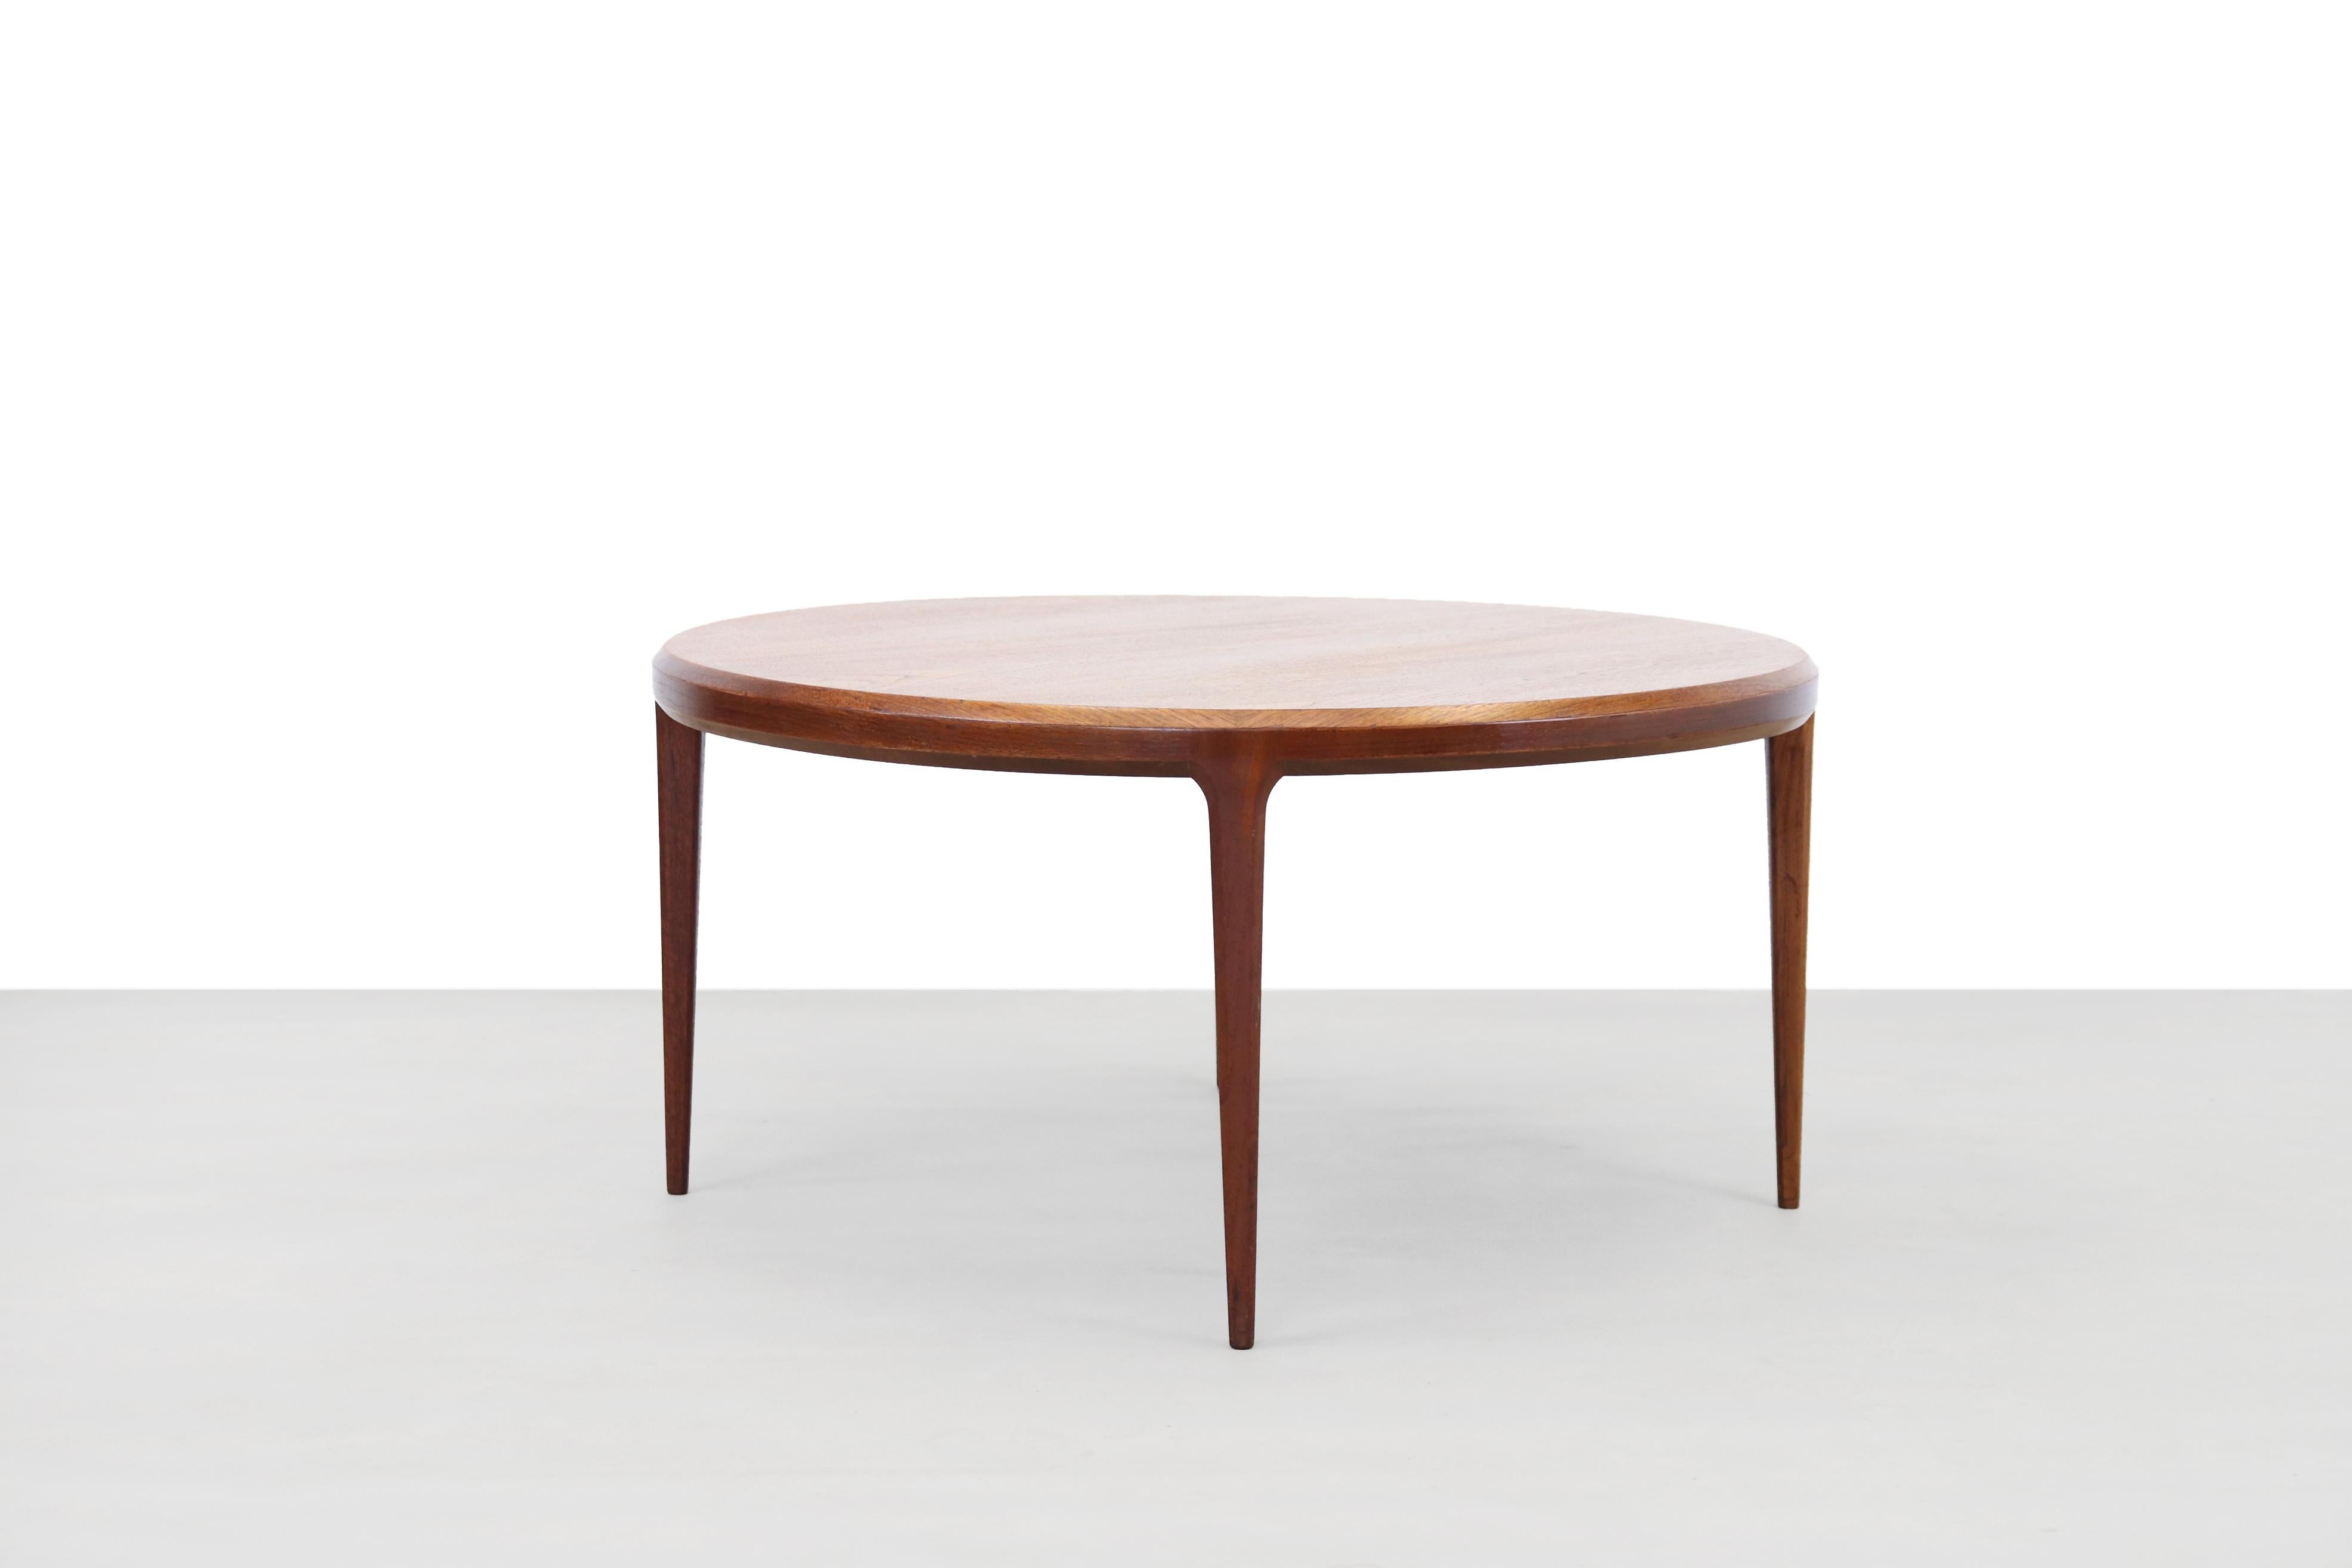 Beautifully designed coffee table by Johannes Andersen for Silkeborg Møbelfabrik. Made of solid teak and teak veneer. With a diameter of 100 cm and a height of 50 cm, it is a large salon table, but the smart design makes the table feel very